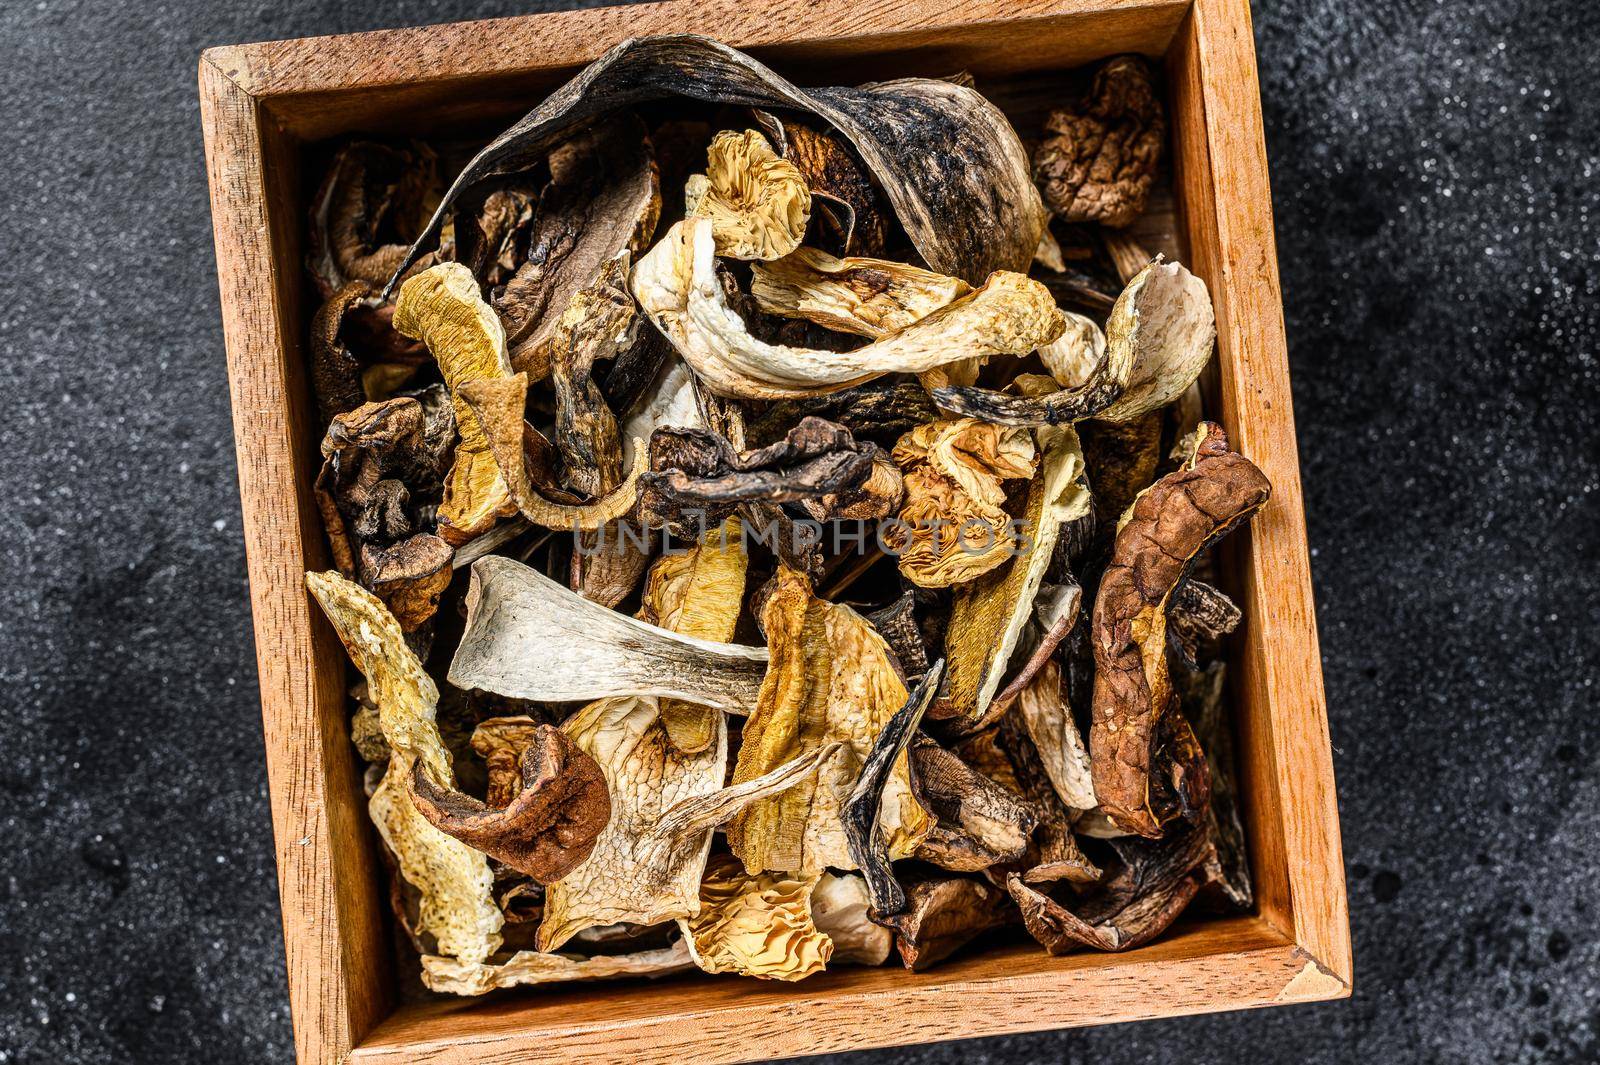 Boletus wild dried mushrooms in a wooden box. Black background. Top view.